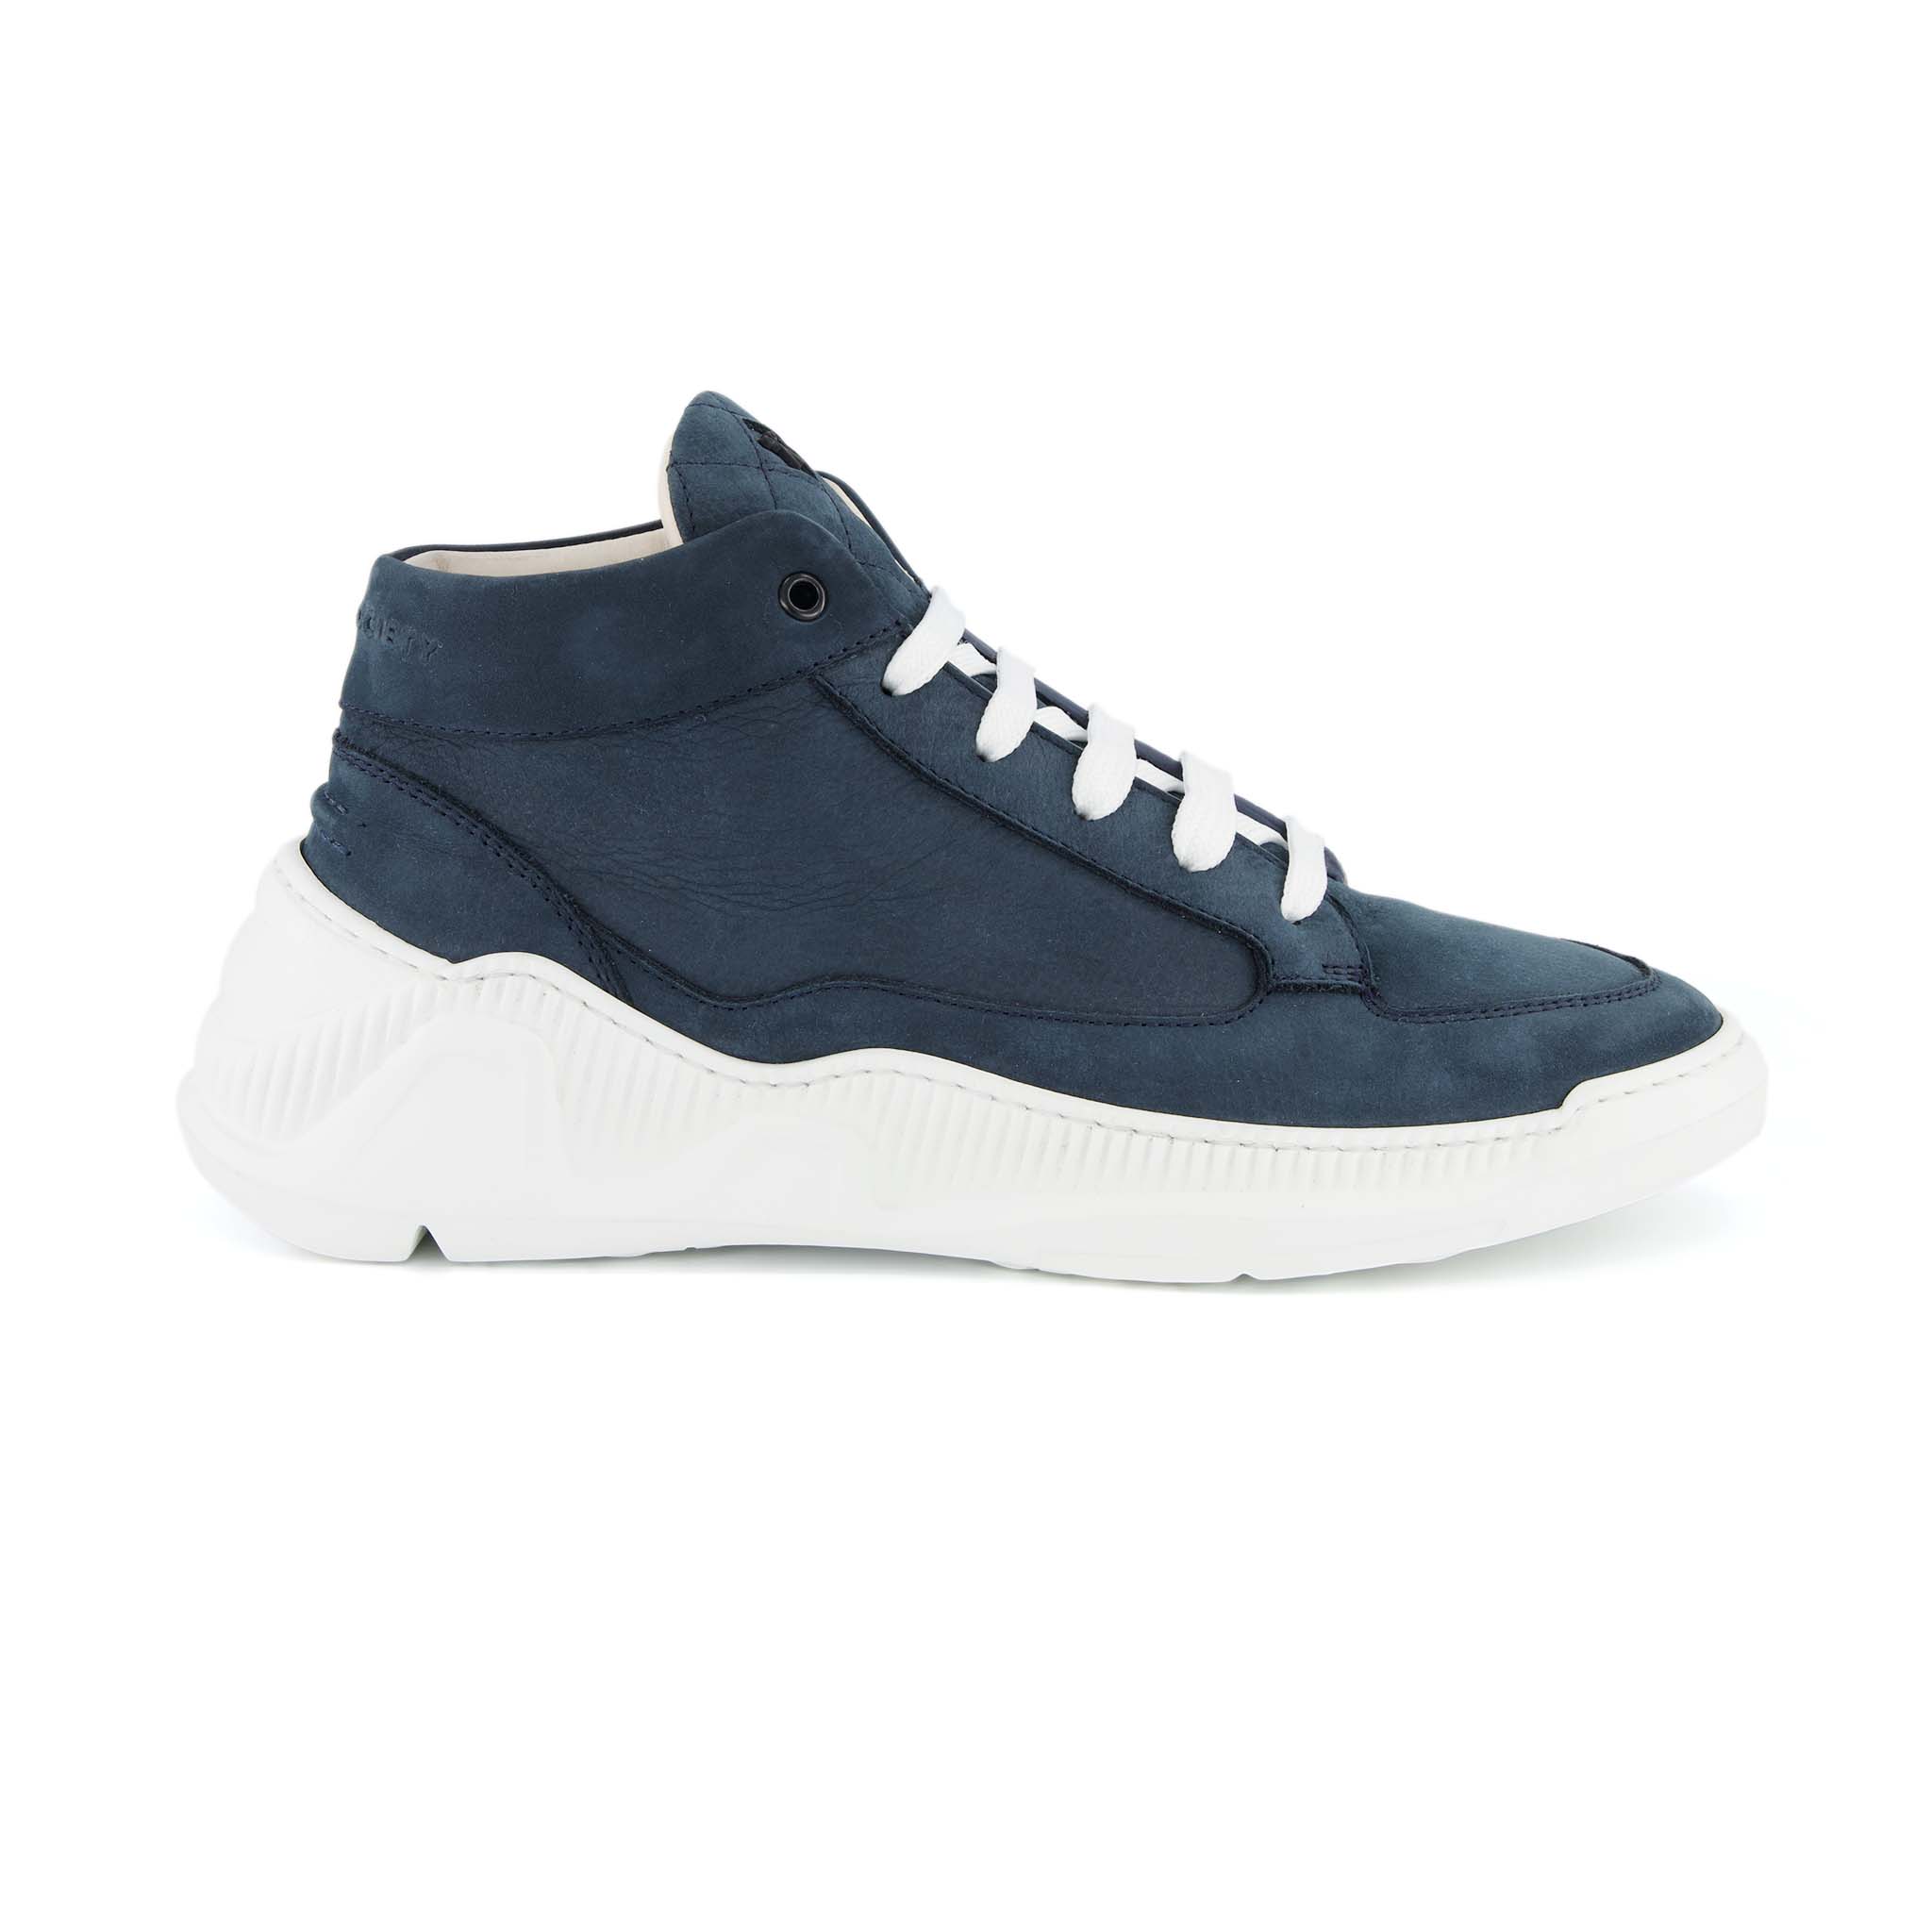 Dante Mid Top Sneaker | Navy Nubuck Italian Leather | White Outsole | Made in Italy | Size 42